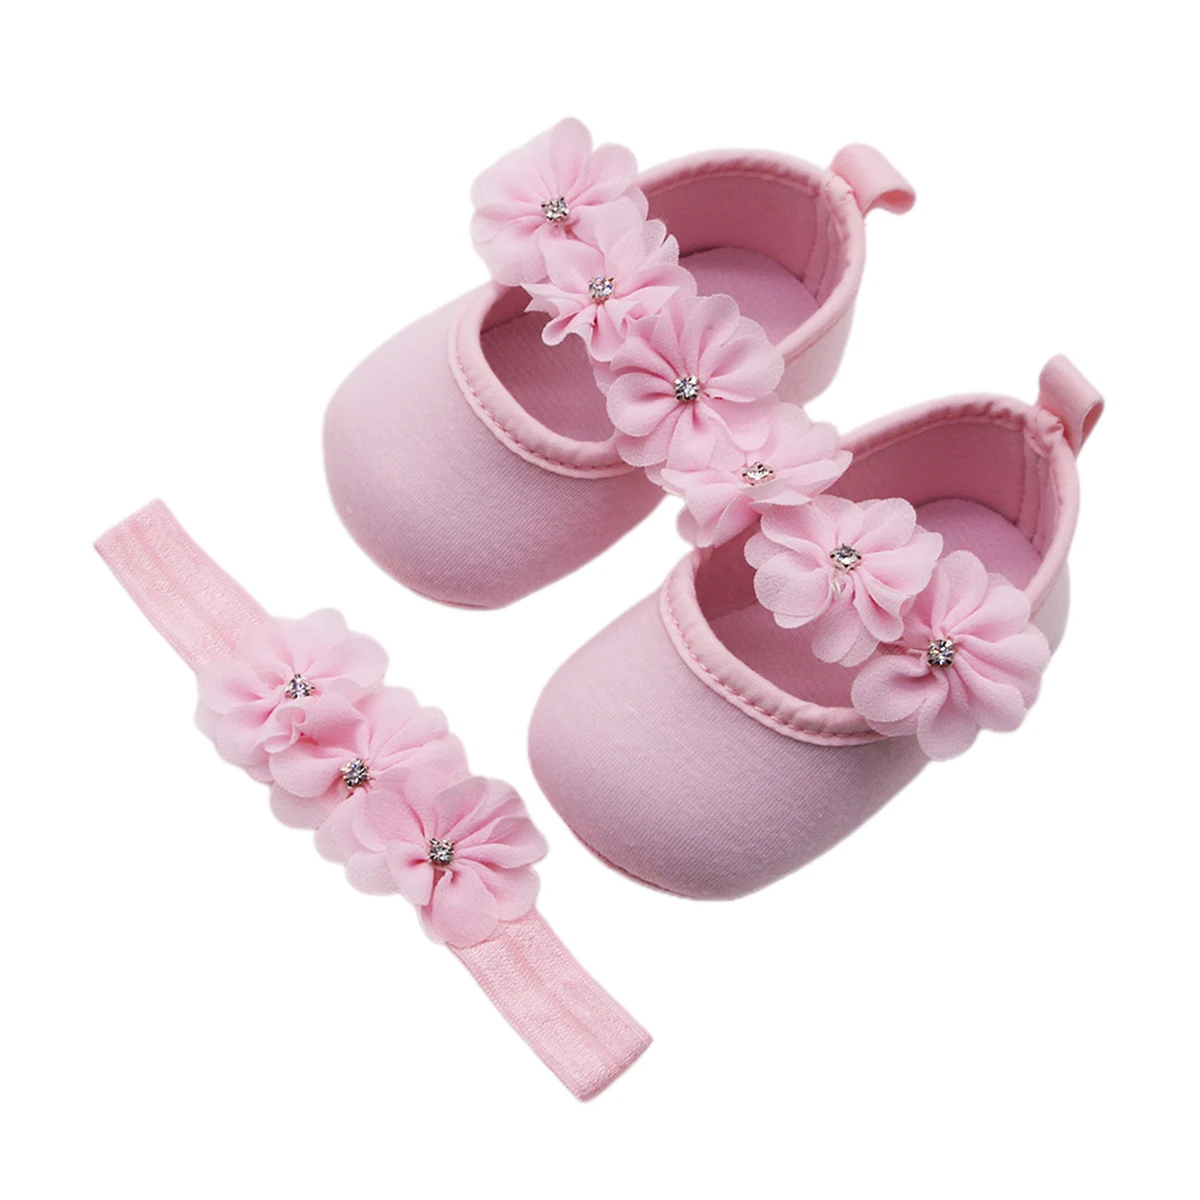 

Newborn Baby Girls Baptism Shoes First Walkers Soft Sole Mary Jane Flats+Solid Color Headband with Flower